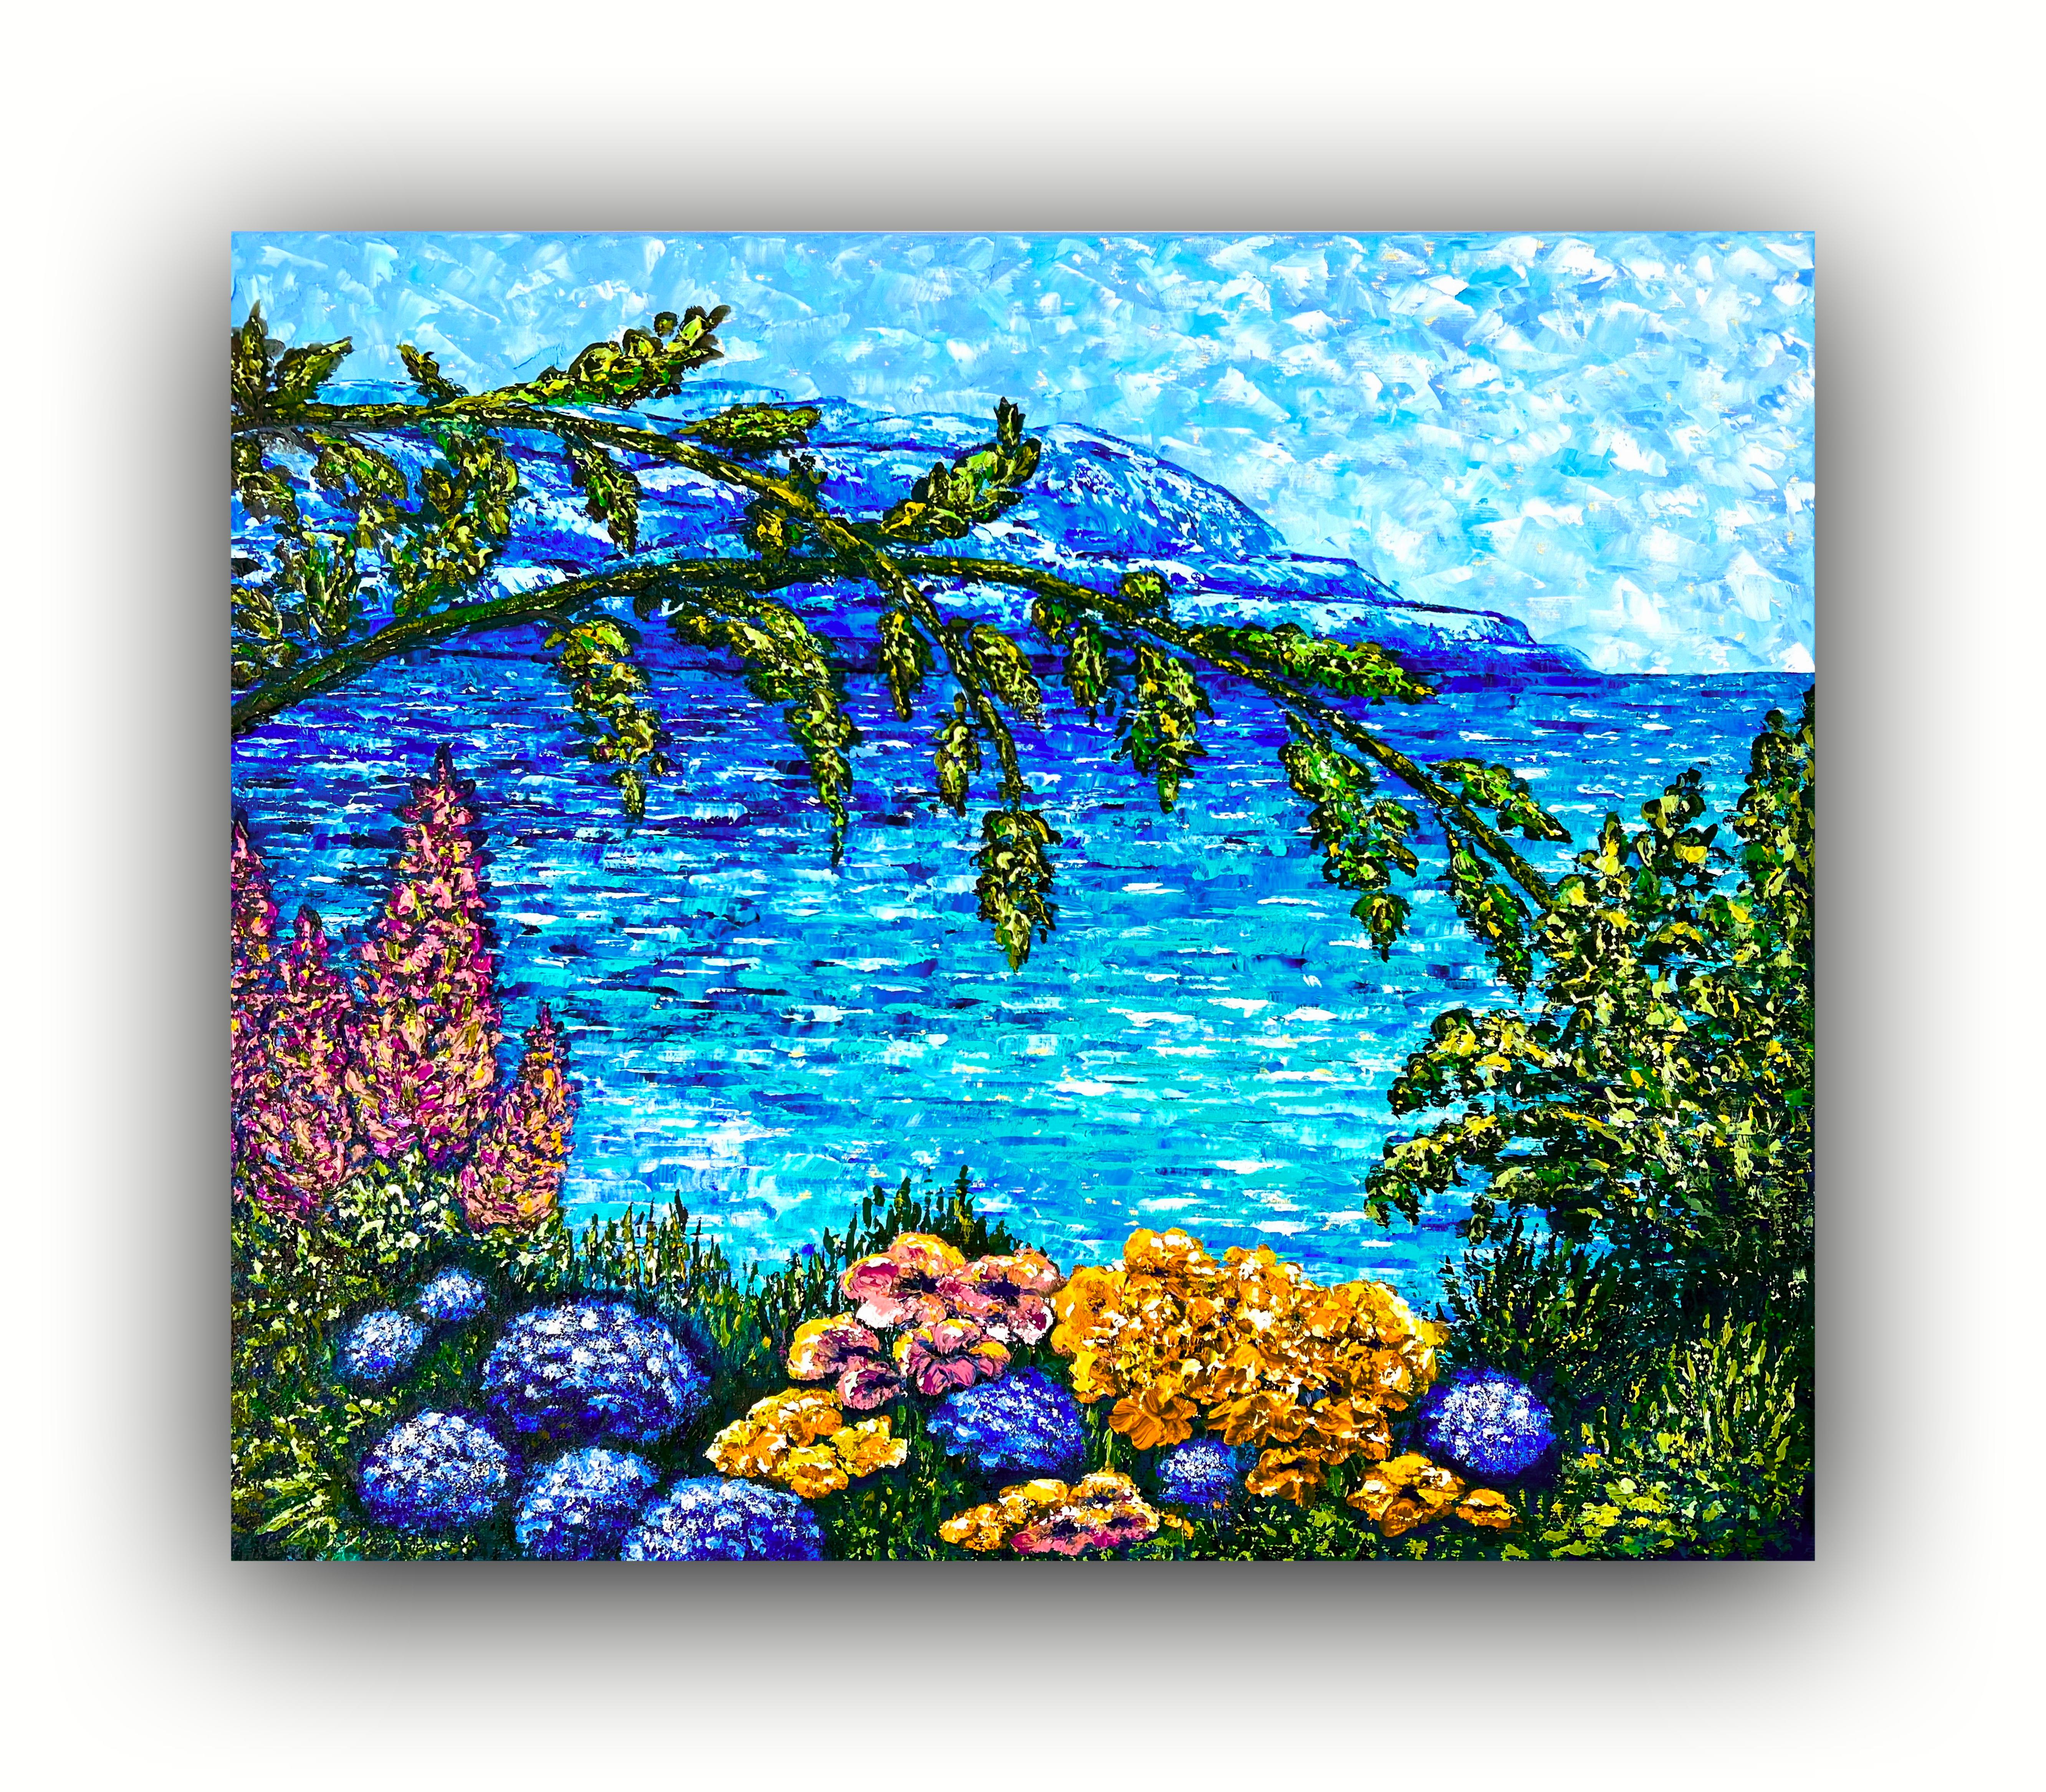  This painting is a passion into the vibrant dance of oils on canvas, capturing the interplay of light with nature's colors. The blooms and foliage, heavy with texture, draw the viewer into a world of serene beauty. The waters mingle with sky in a